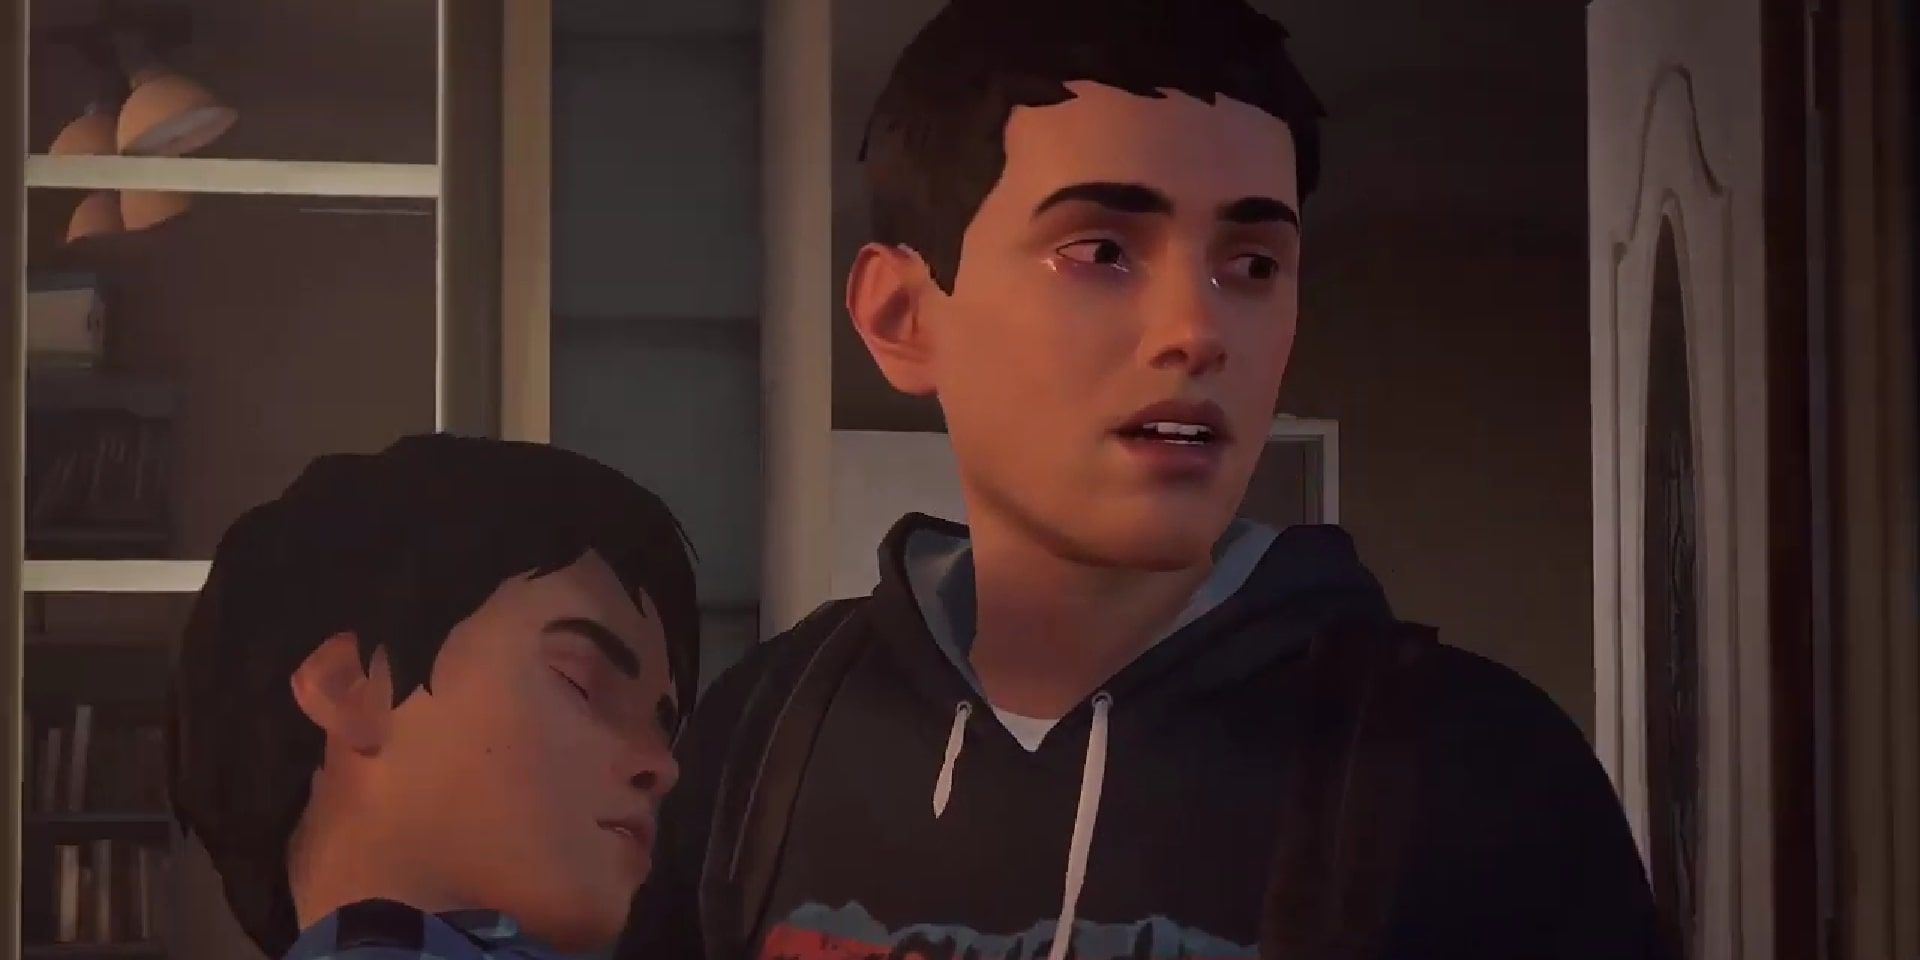 Sean crying and running with an unconscious Daniel in his after the tragic incident that played out by their home in Life is Strange 2